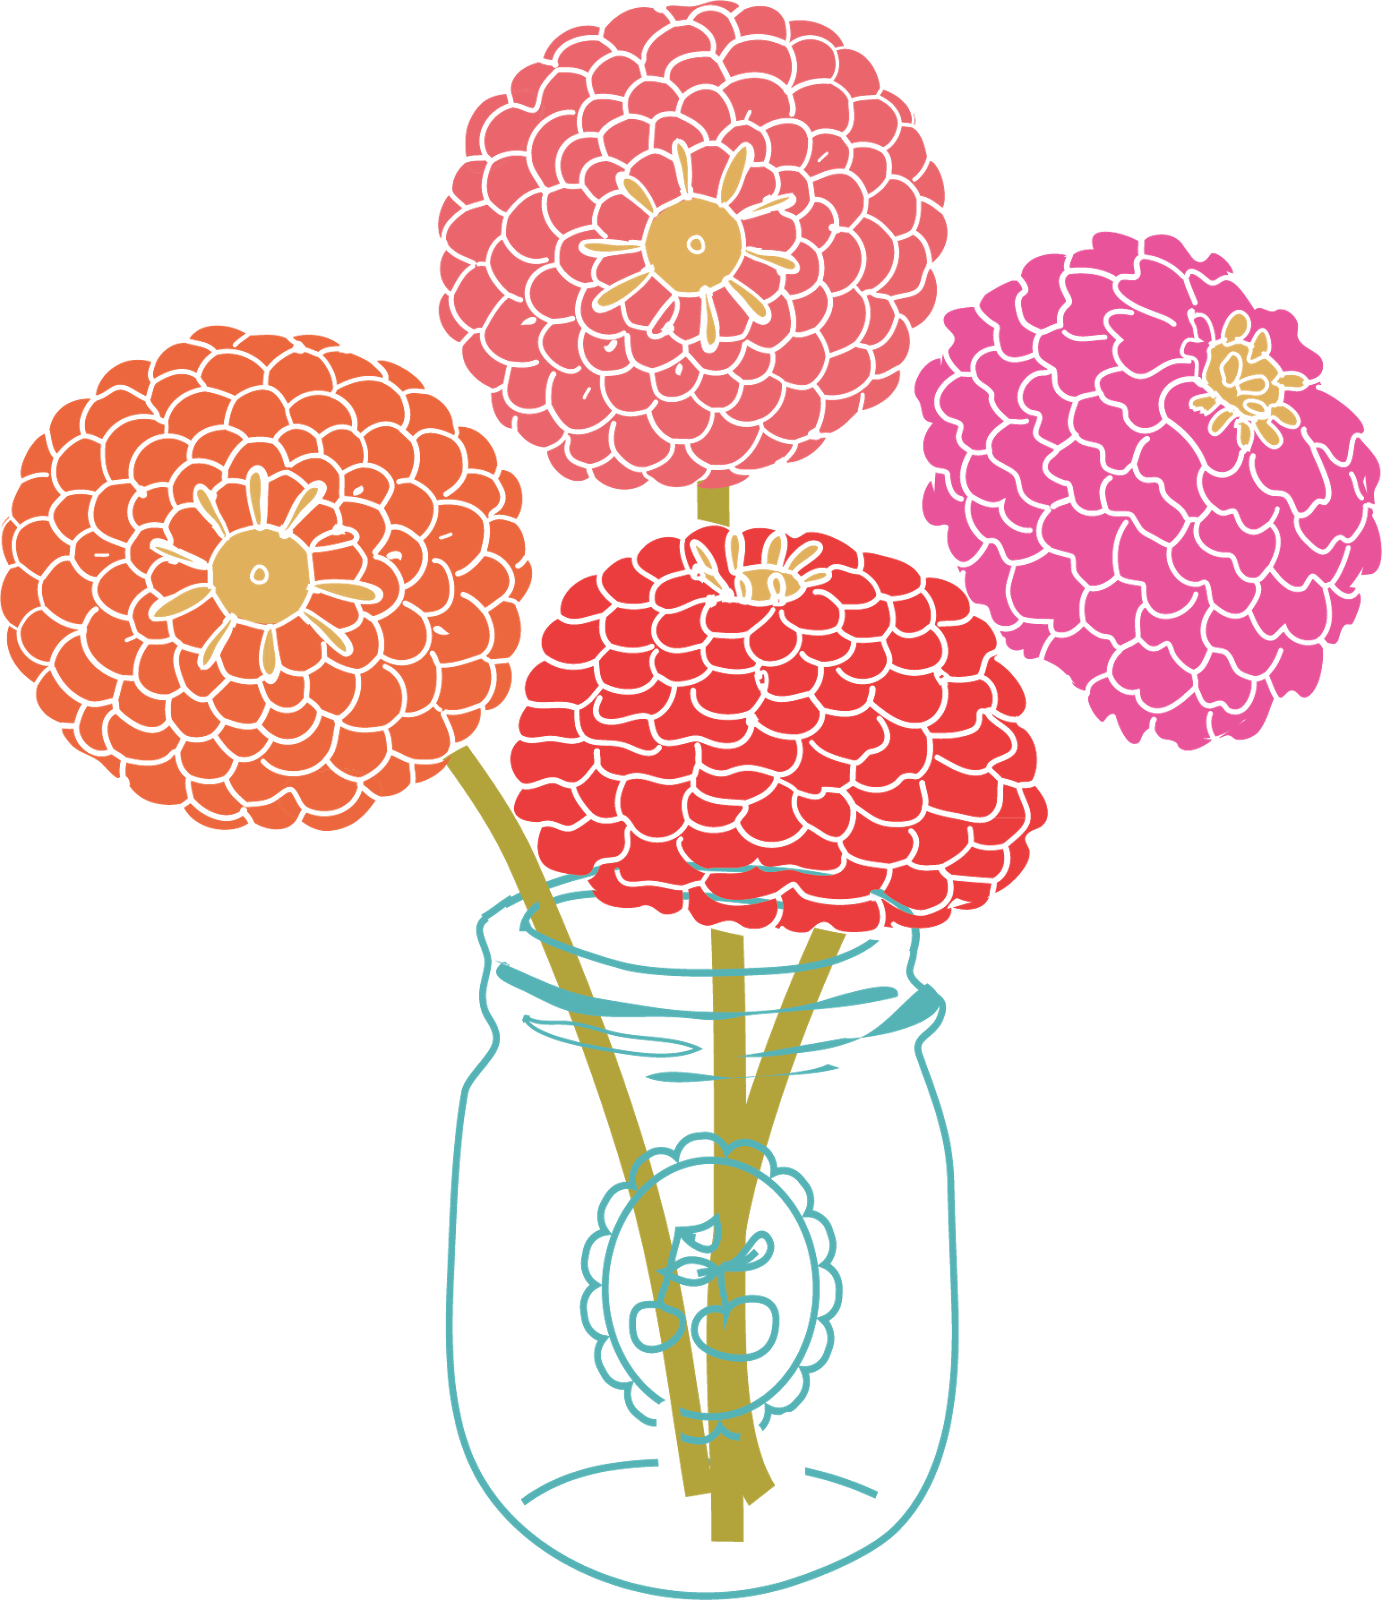 Flower clipart free clipart images 6 - Cliparting.com